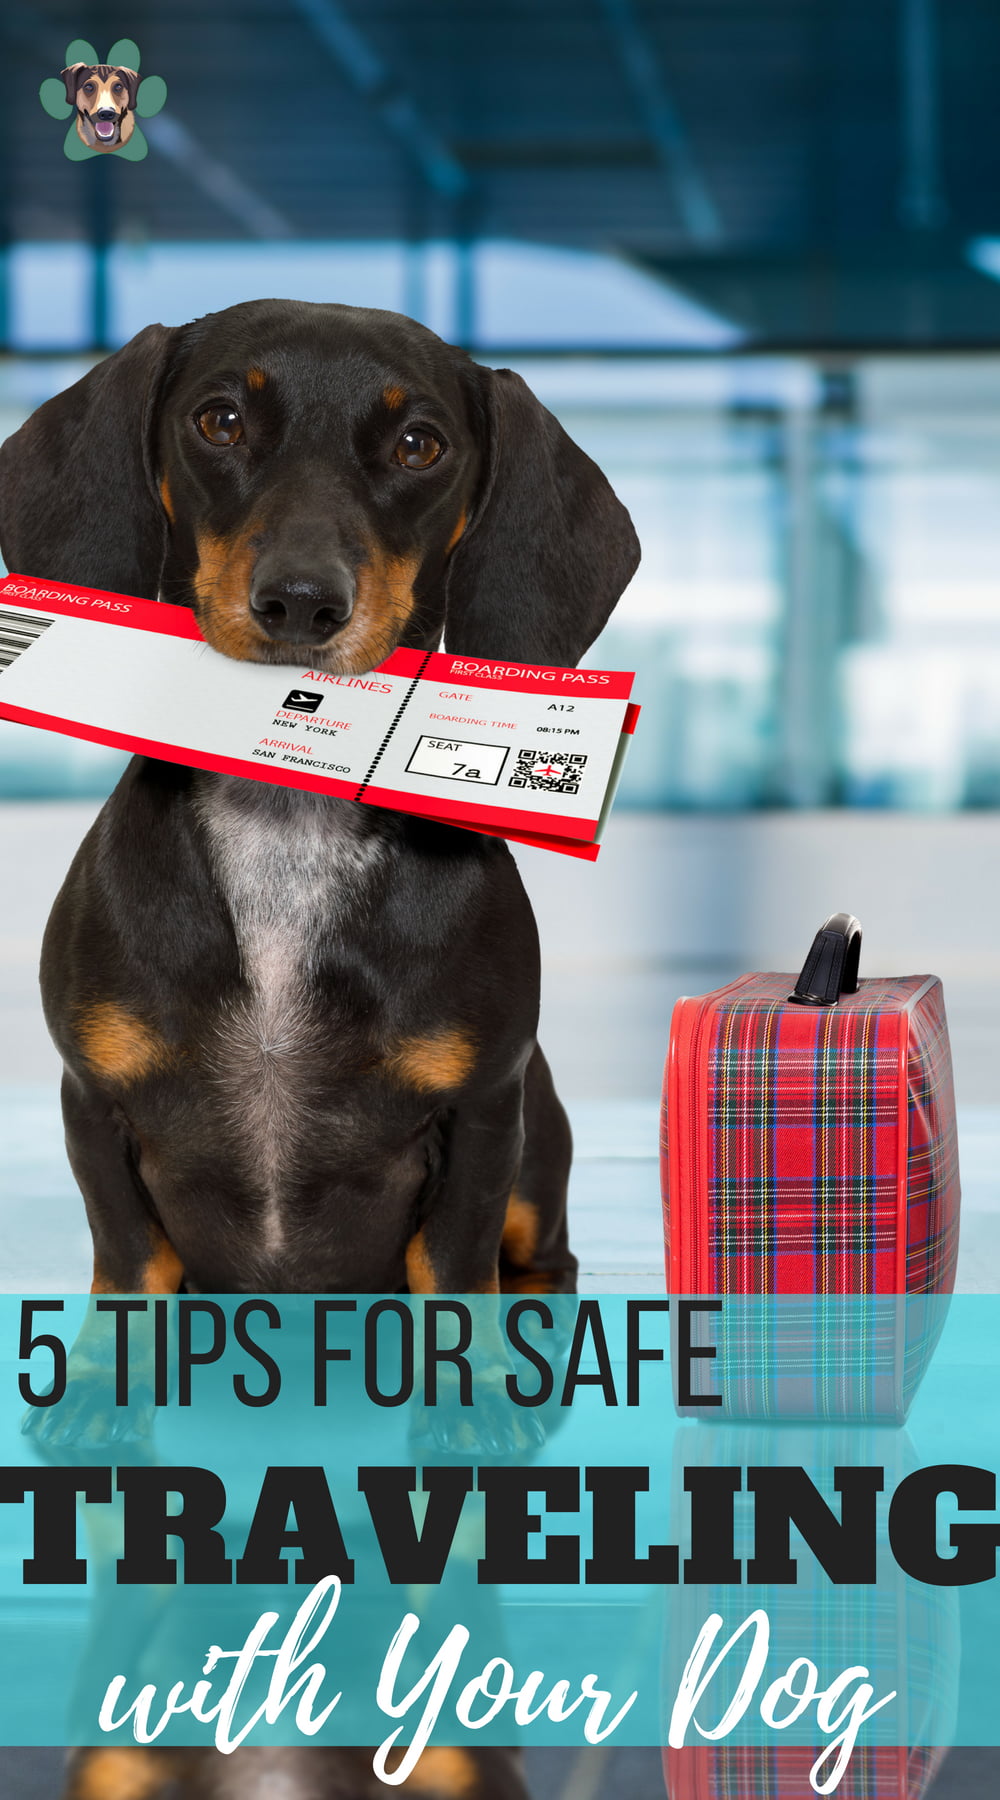 5 Tips for Traveling Safely with Your Pets